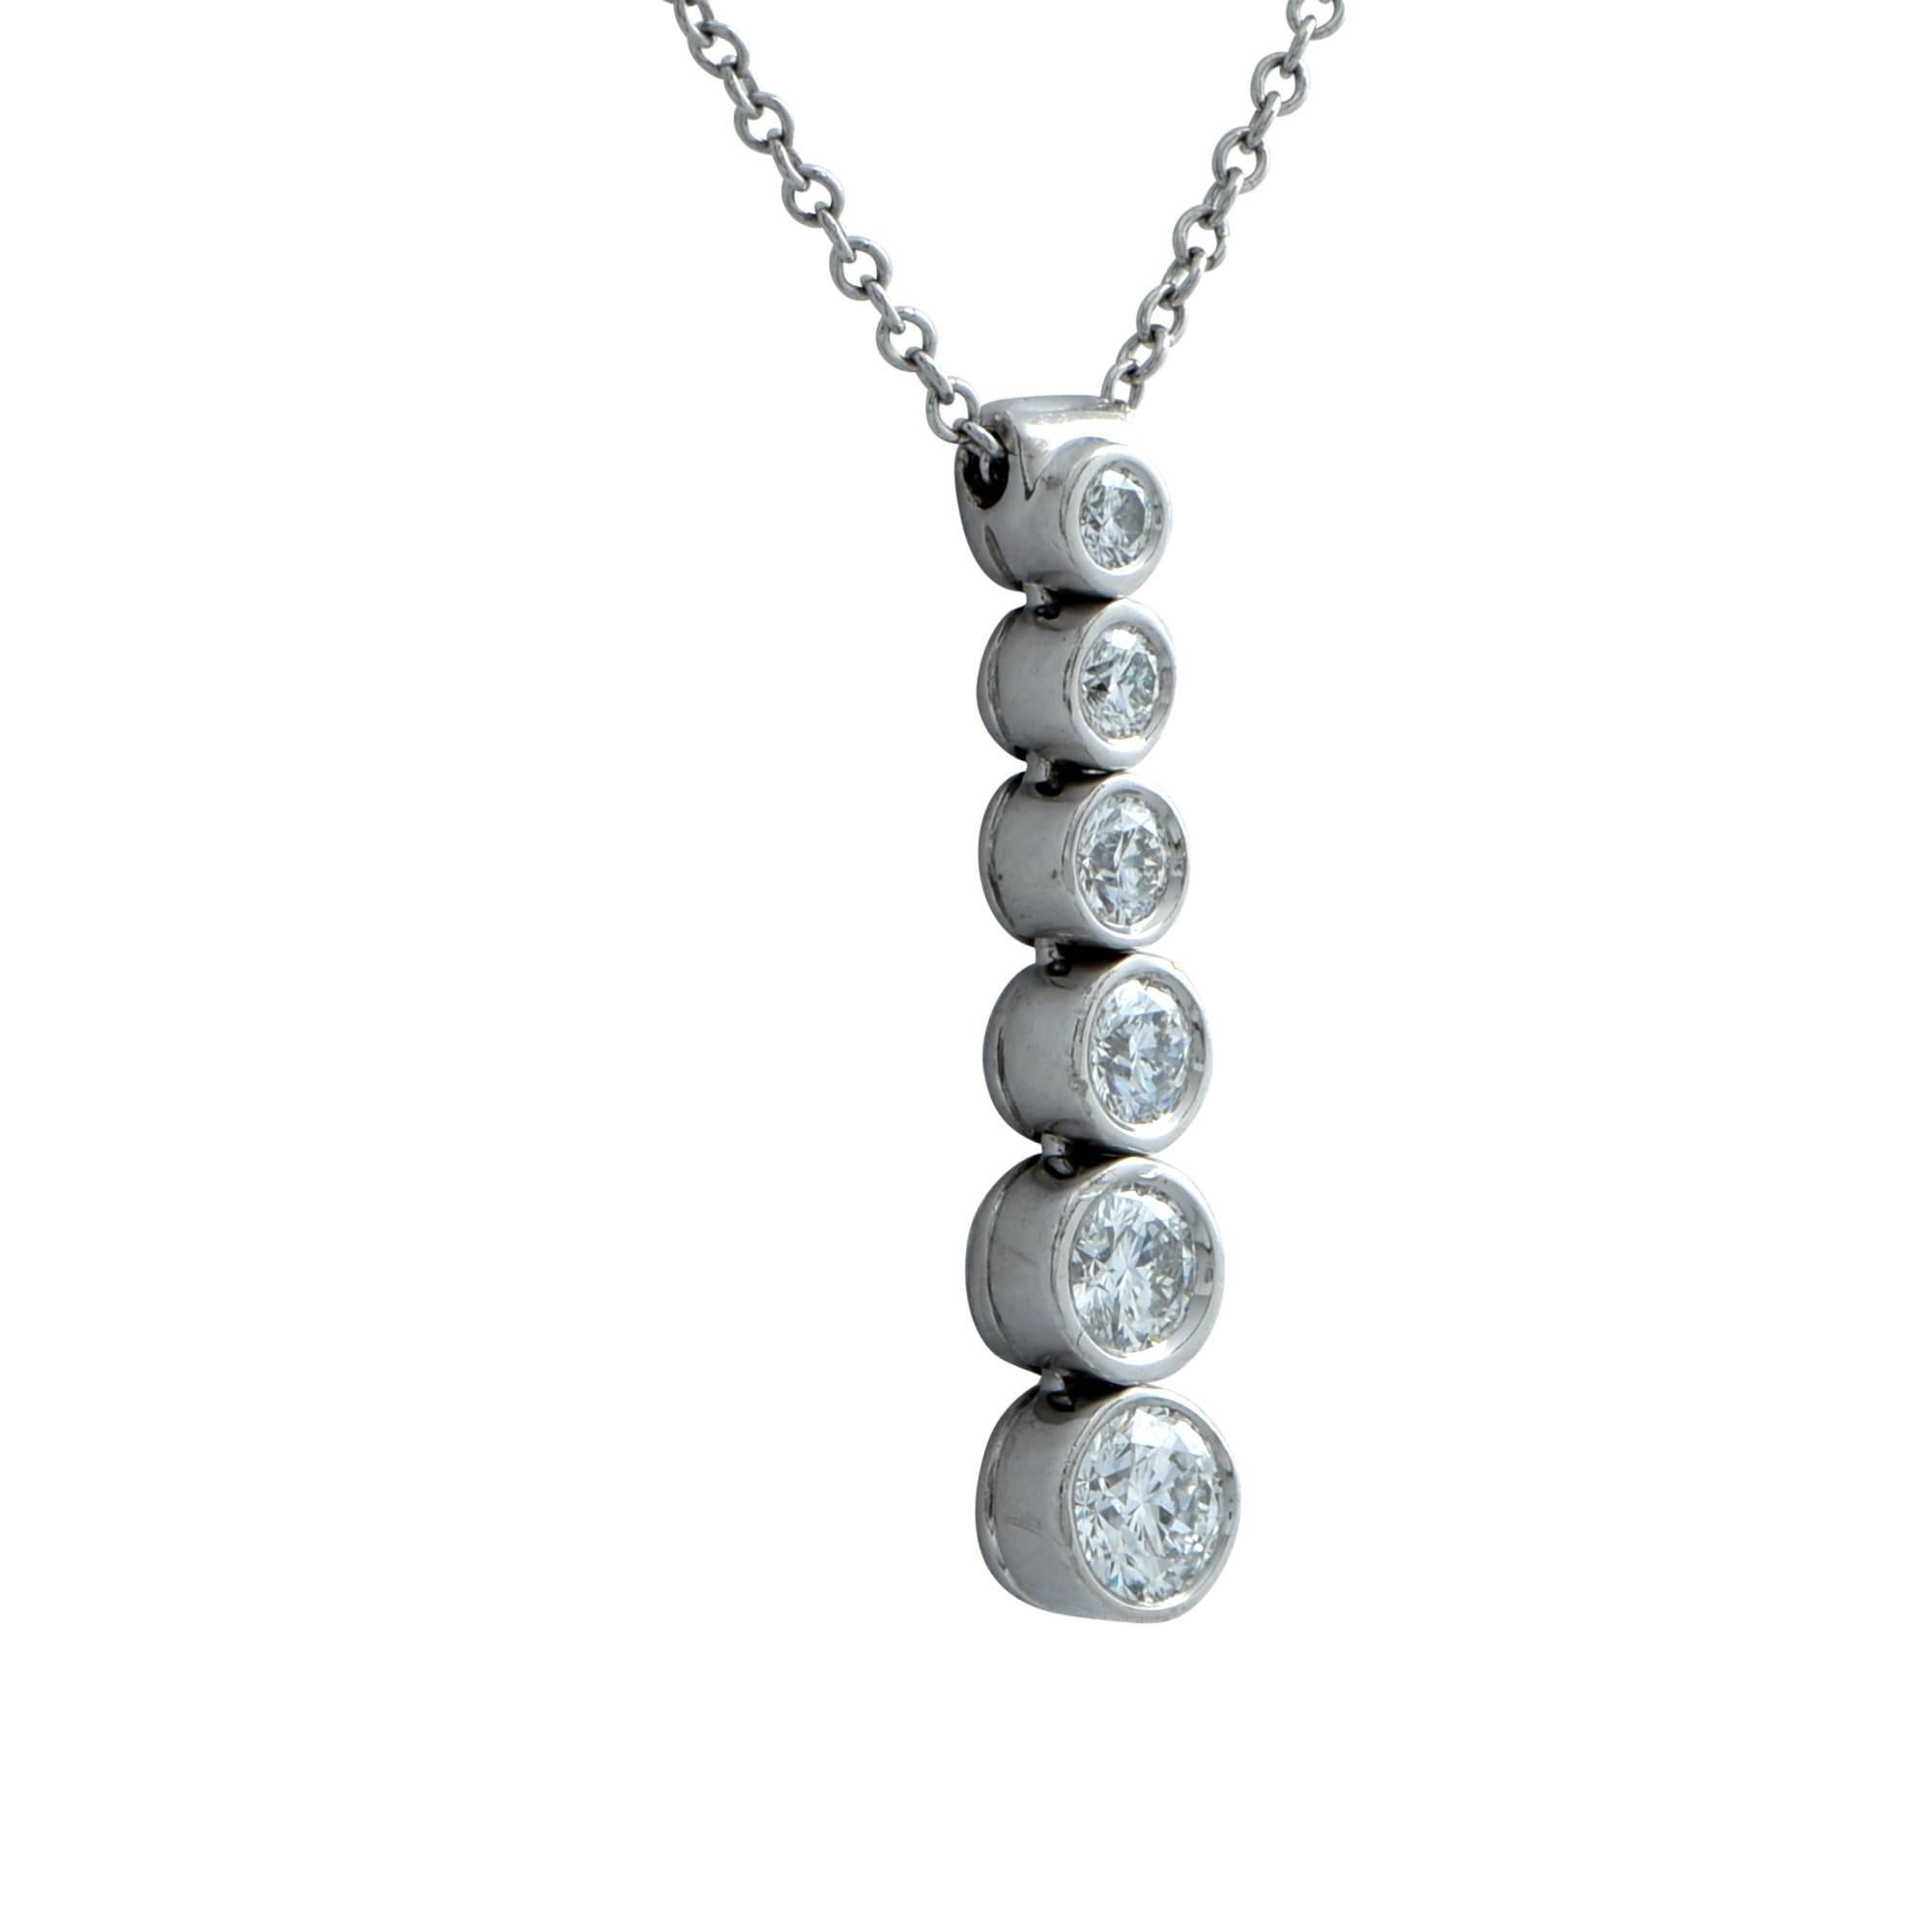 Tiffany and Co. platinum drop necklace from the jazz collection featuring 6 graduating round brilliant cut diamonds weighing approximately .45ct total, F color VS clarity. The necklace has a 16-inch chain and the pendant measures .9 inches in